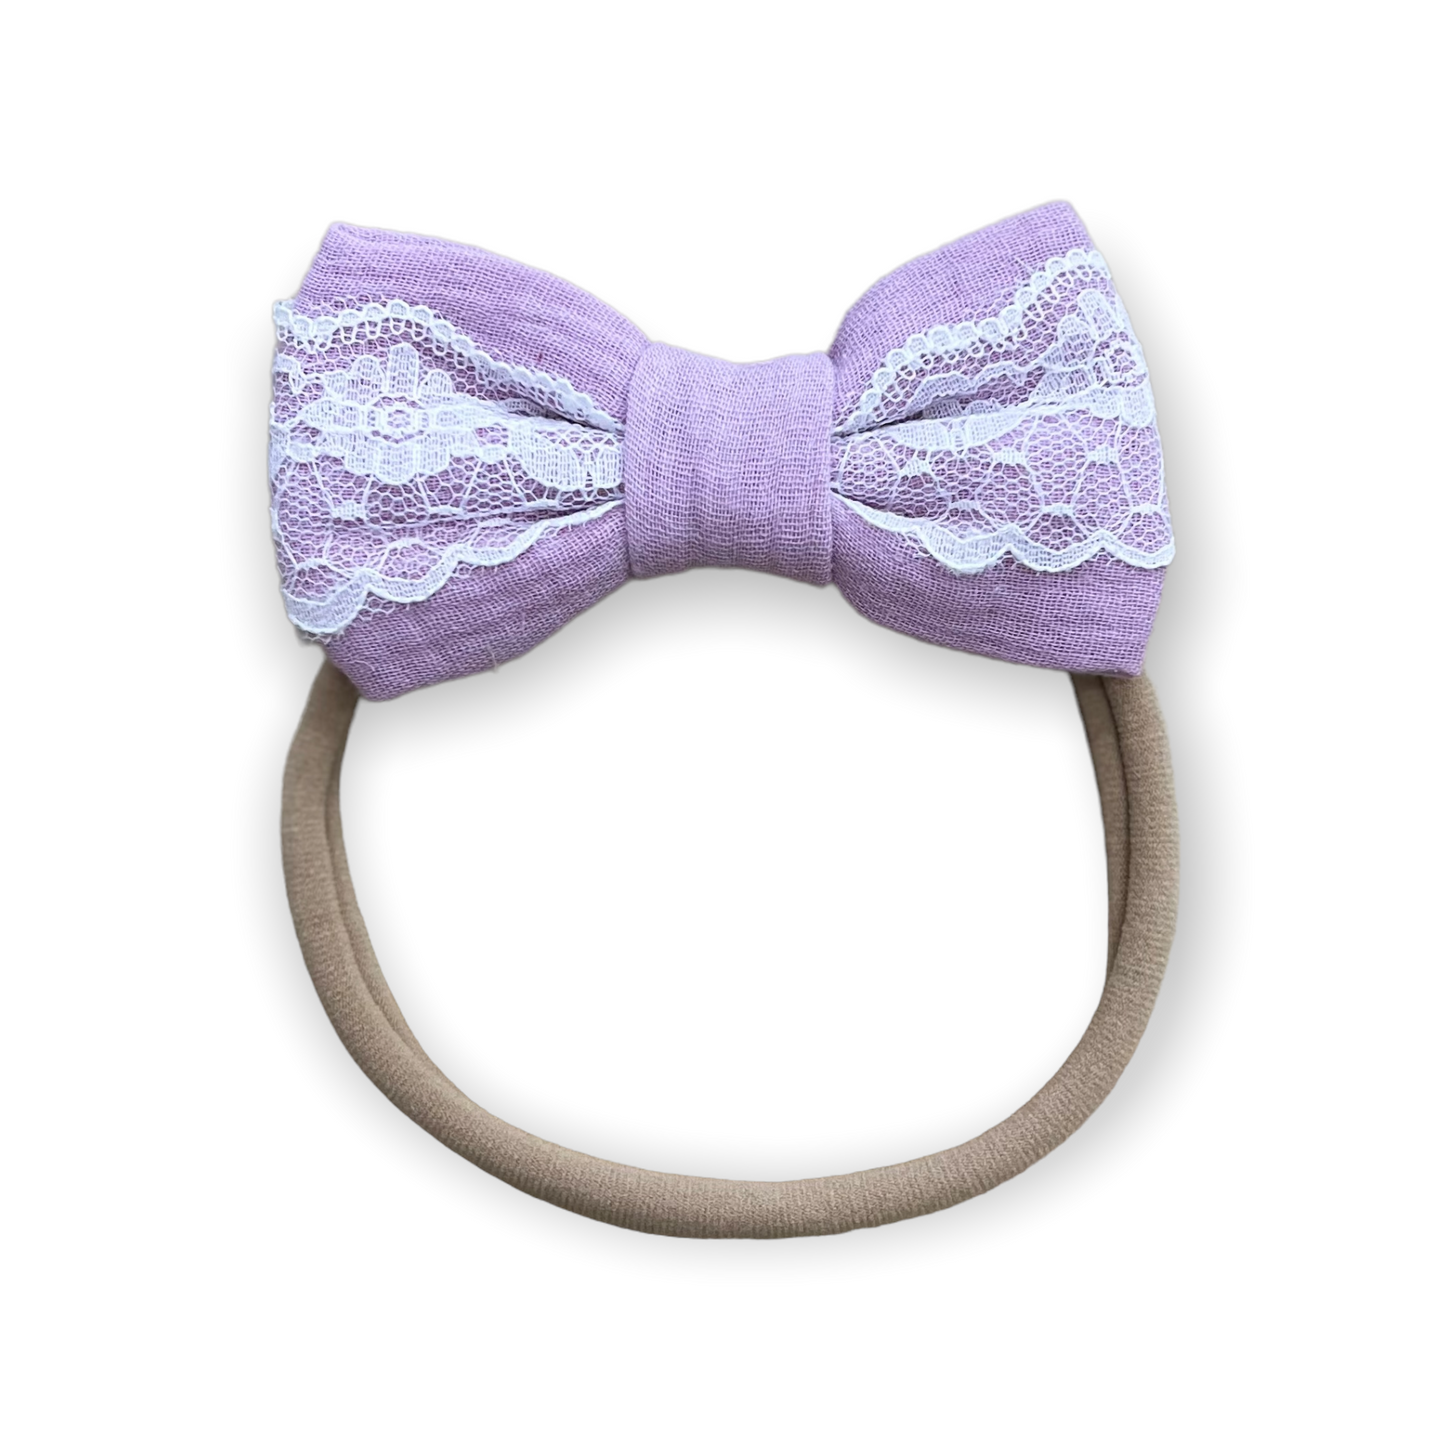 Lace Bows | Everly Lane